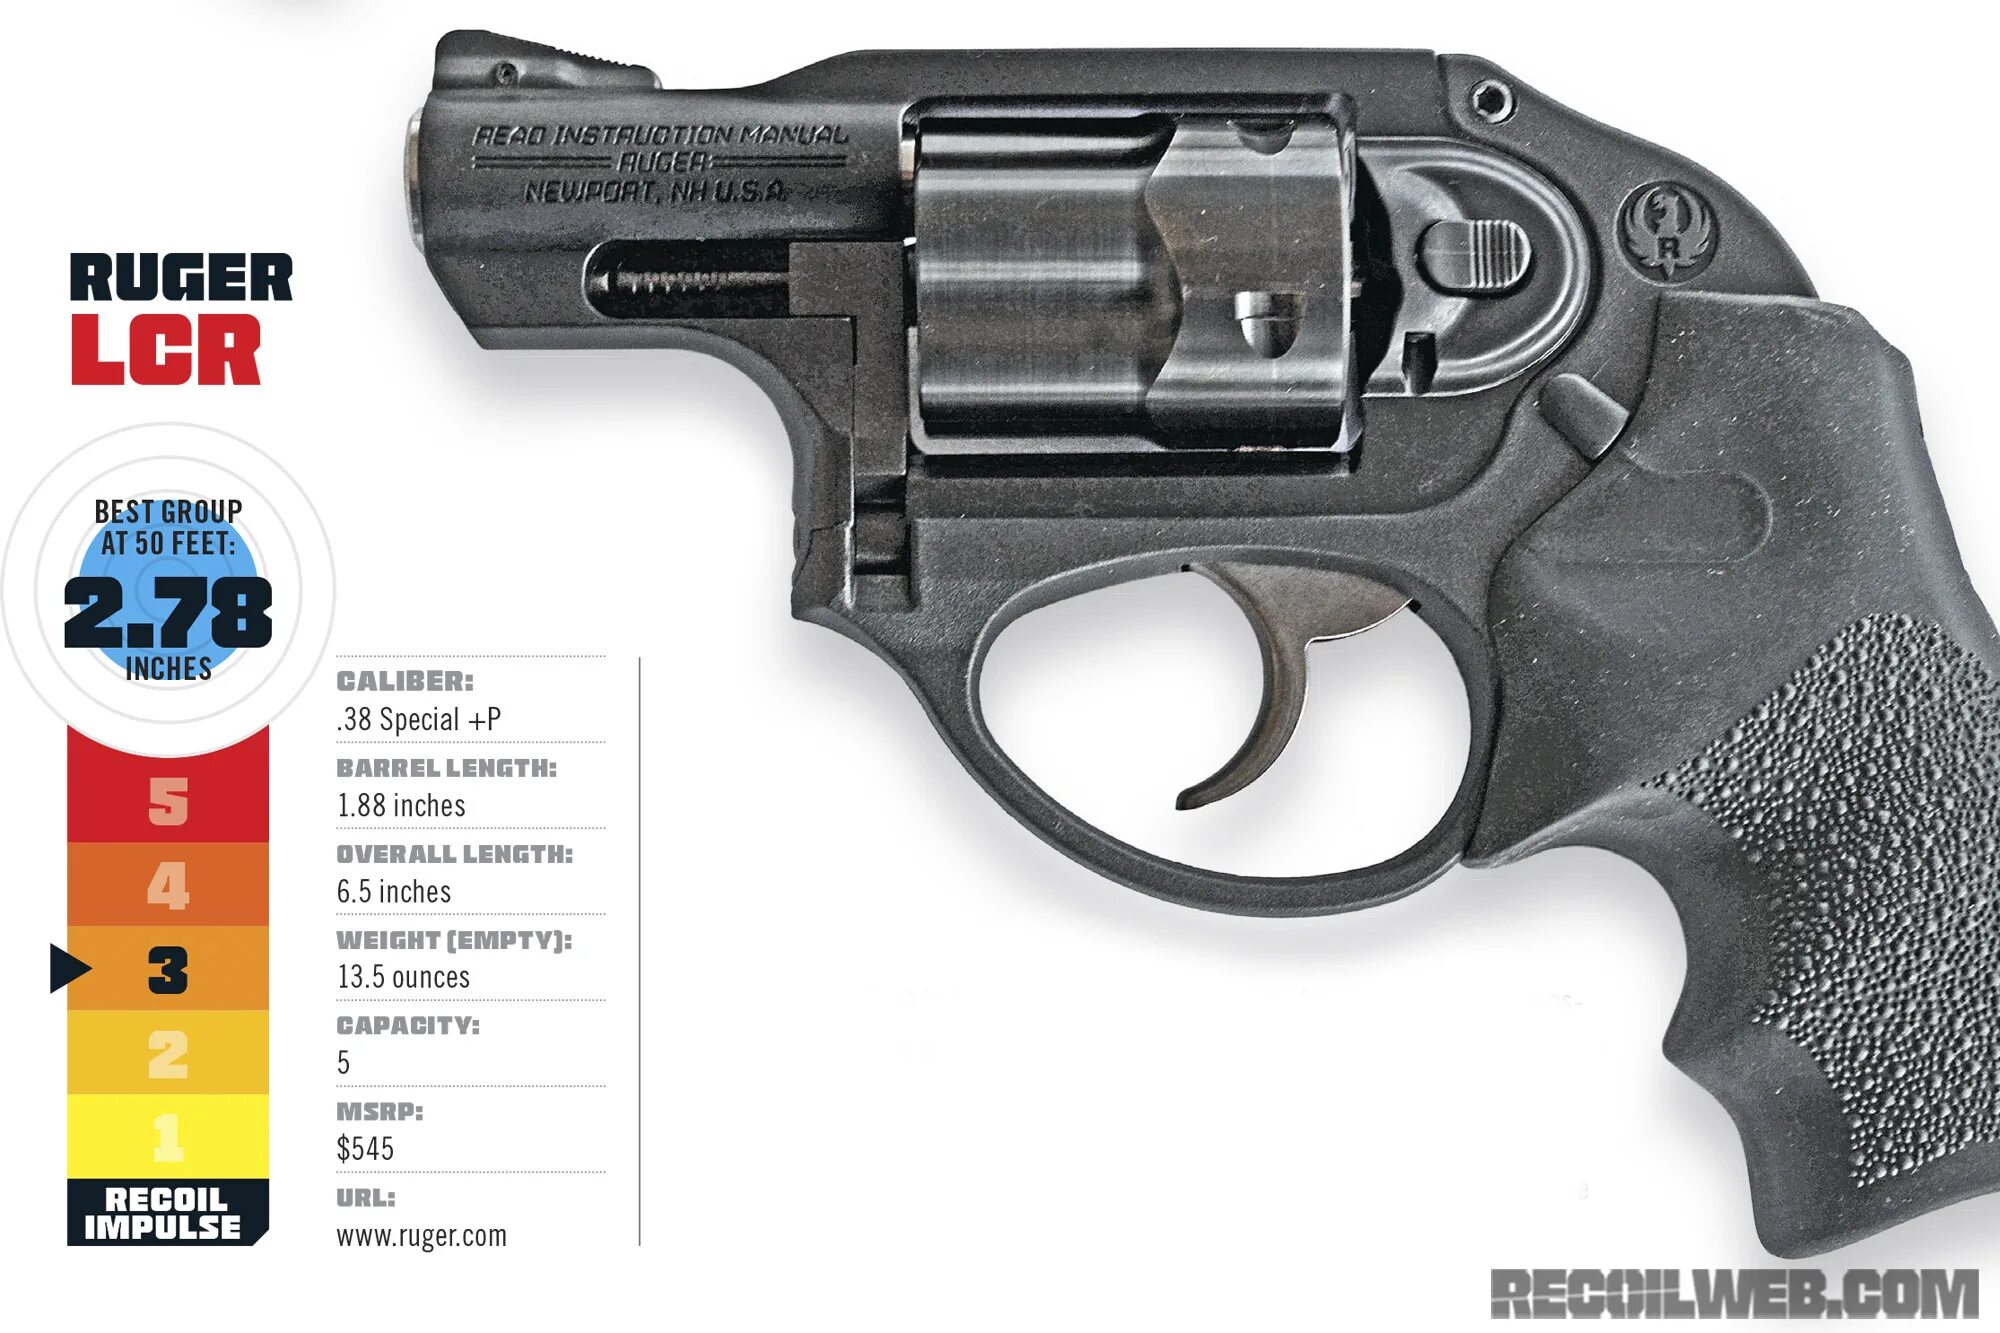 Револьвер Ругер 38. Ruger LCR 38 Special. Ruger LCR чертеж. Ruger LCR Double-Action Revolver схема. Тип 13 no 7488